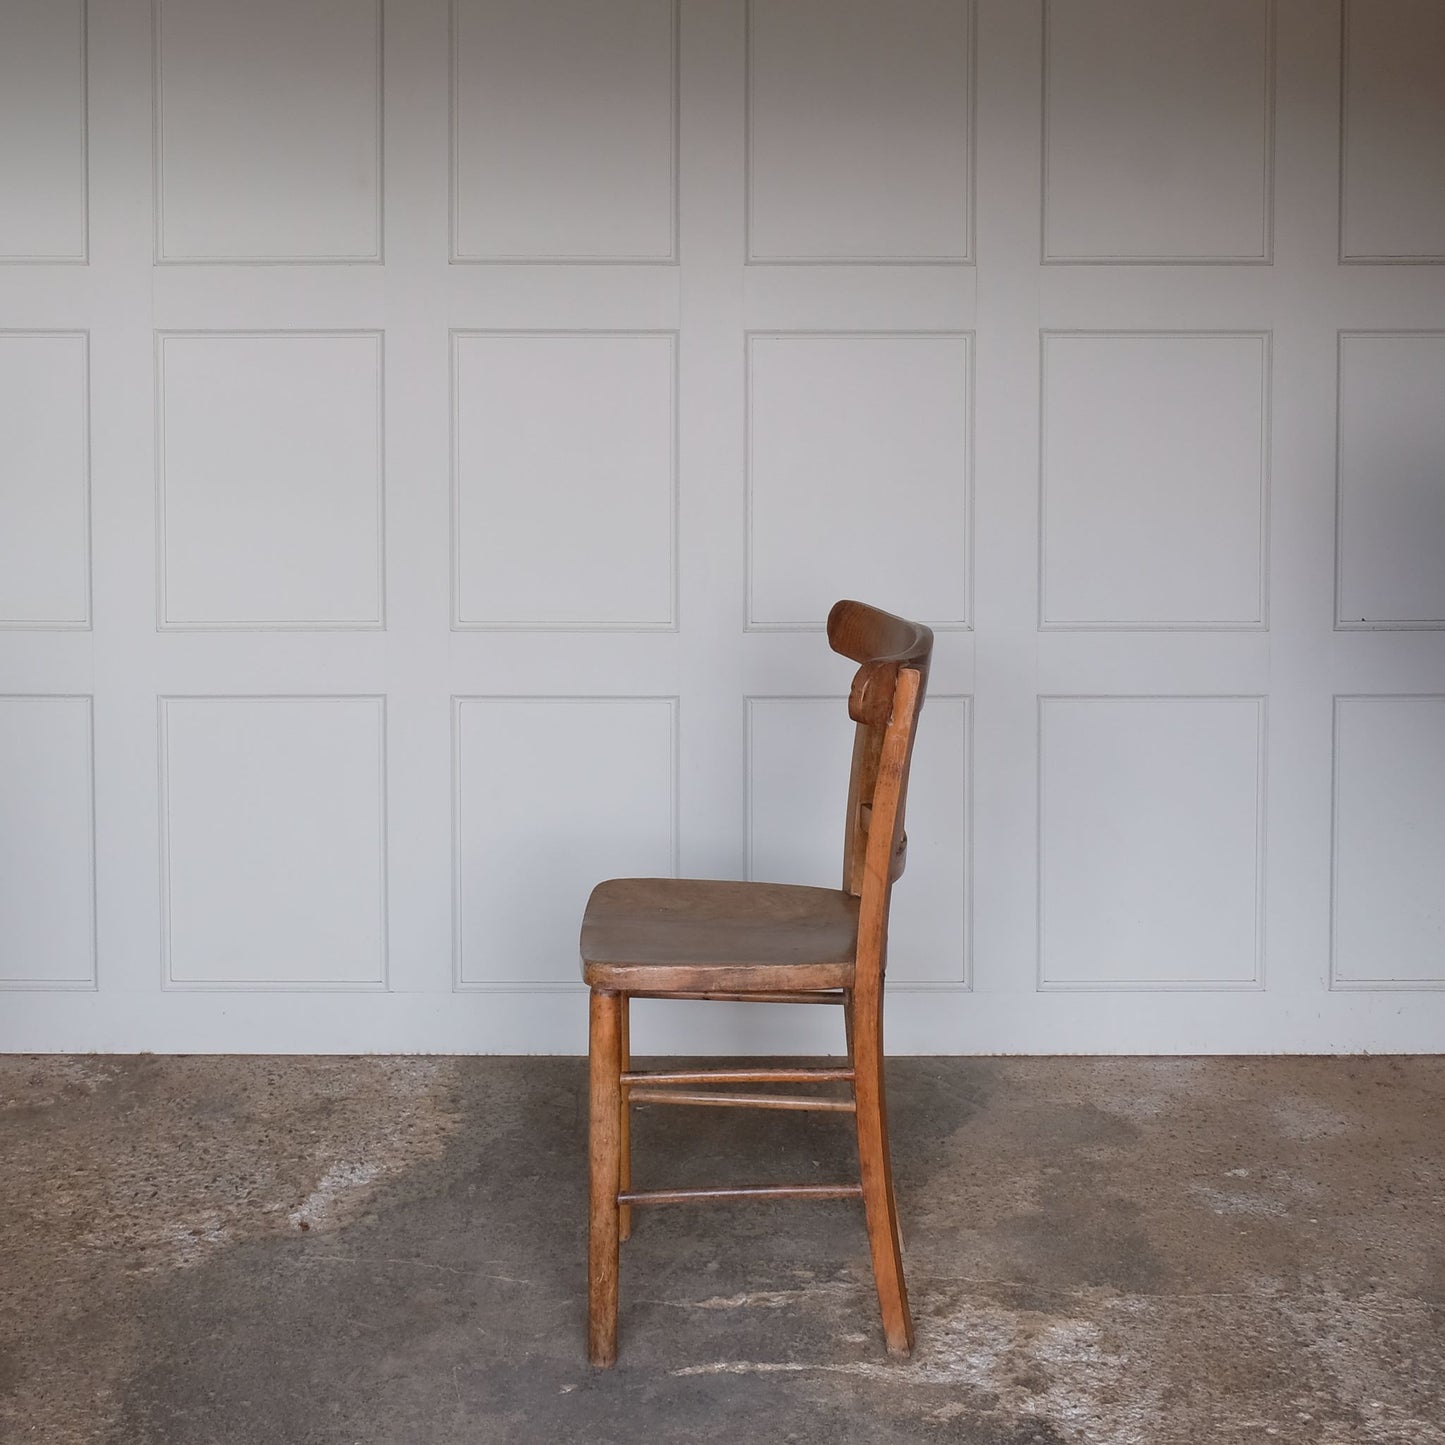 A classic school chair design, of adult size, made from hard-wearing and durable solid wood. With signs of life, cleaned and waxed, in good, sturdy condition.